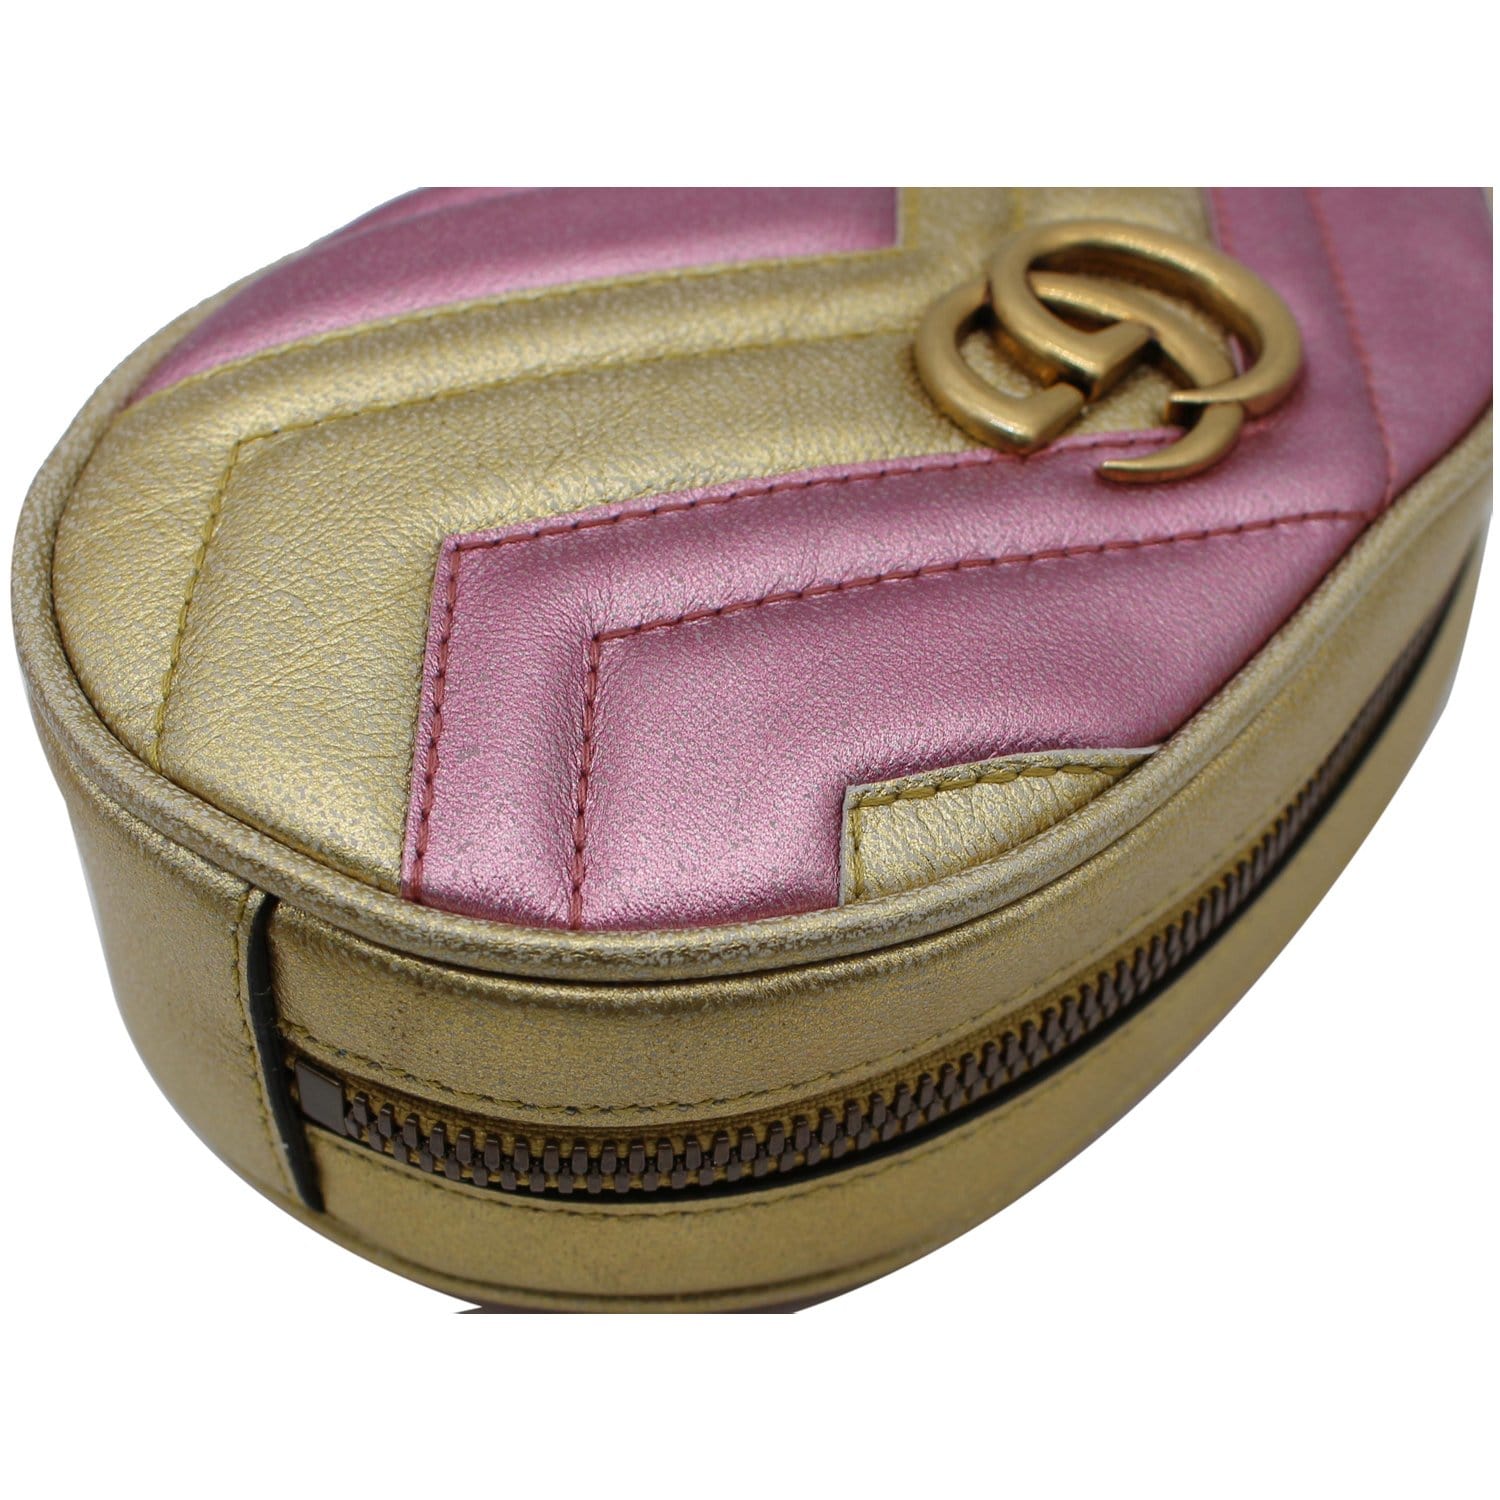 Gucci GG Marmont Matelassé Leather Belt Bag in Pink